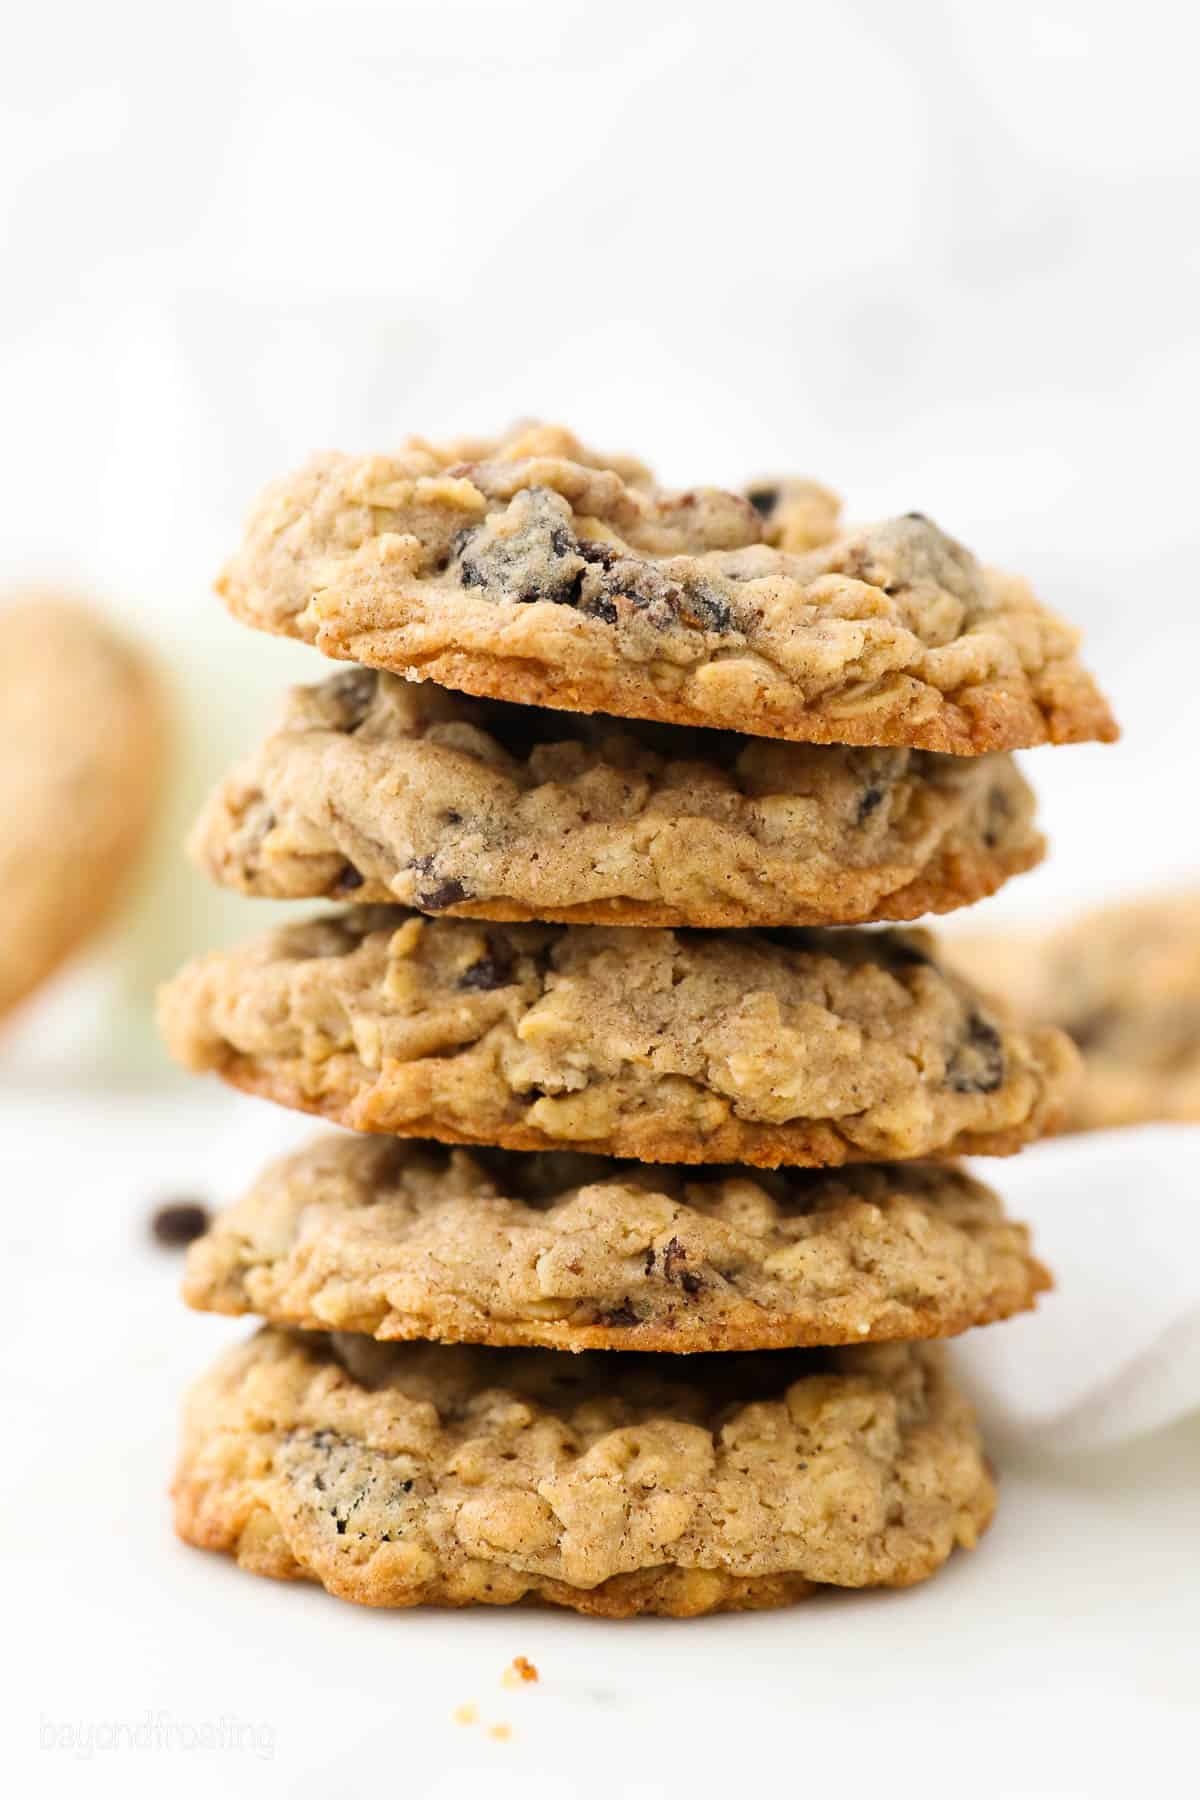 A tall stack of 5 oatmeal cookies